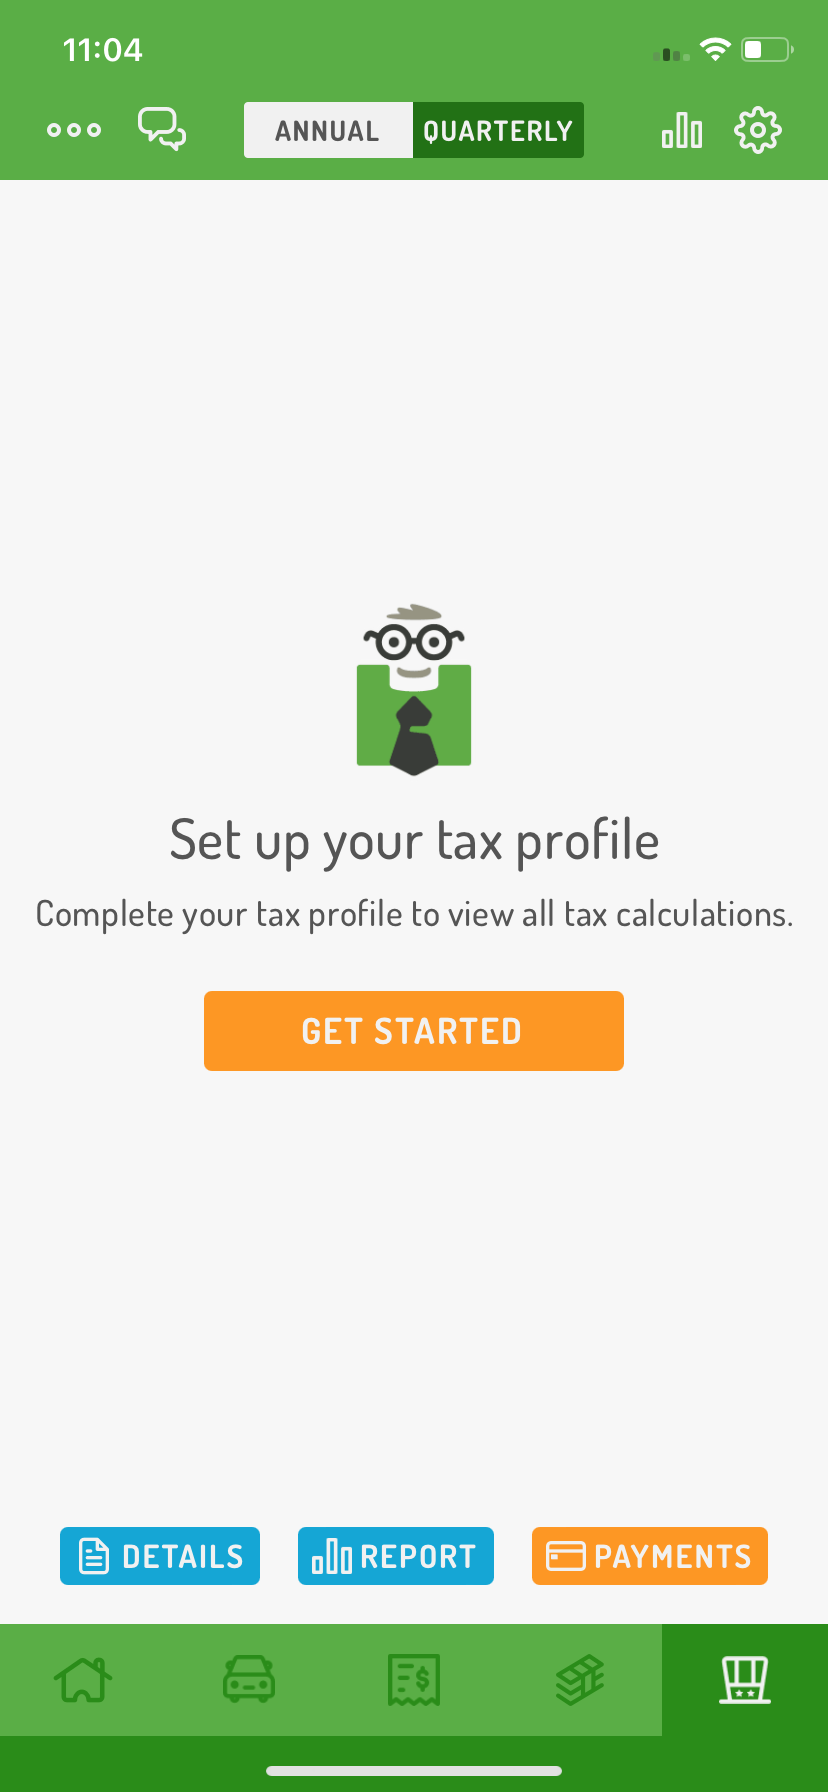 hurdlr lets users setup a full tax profile to be able to see all tax-related data in one place